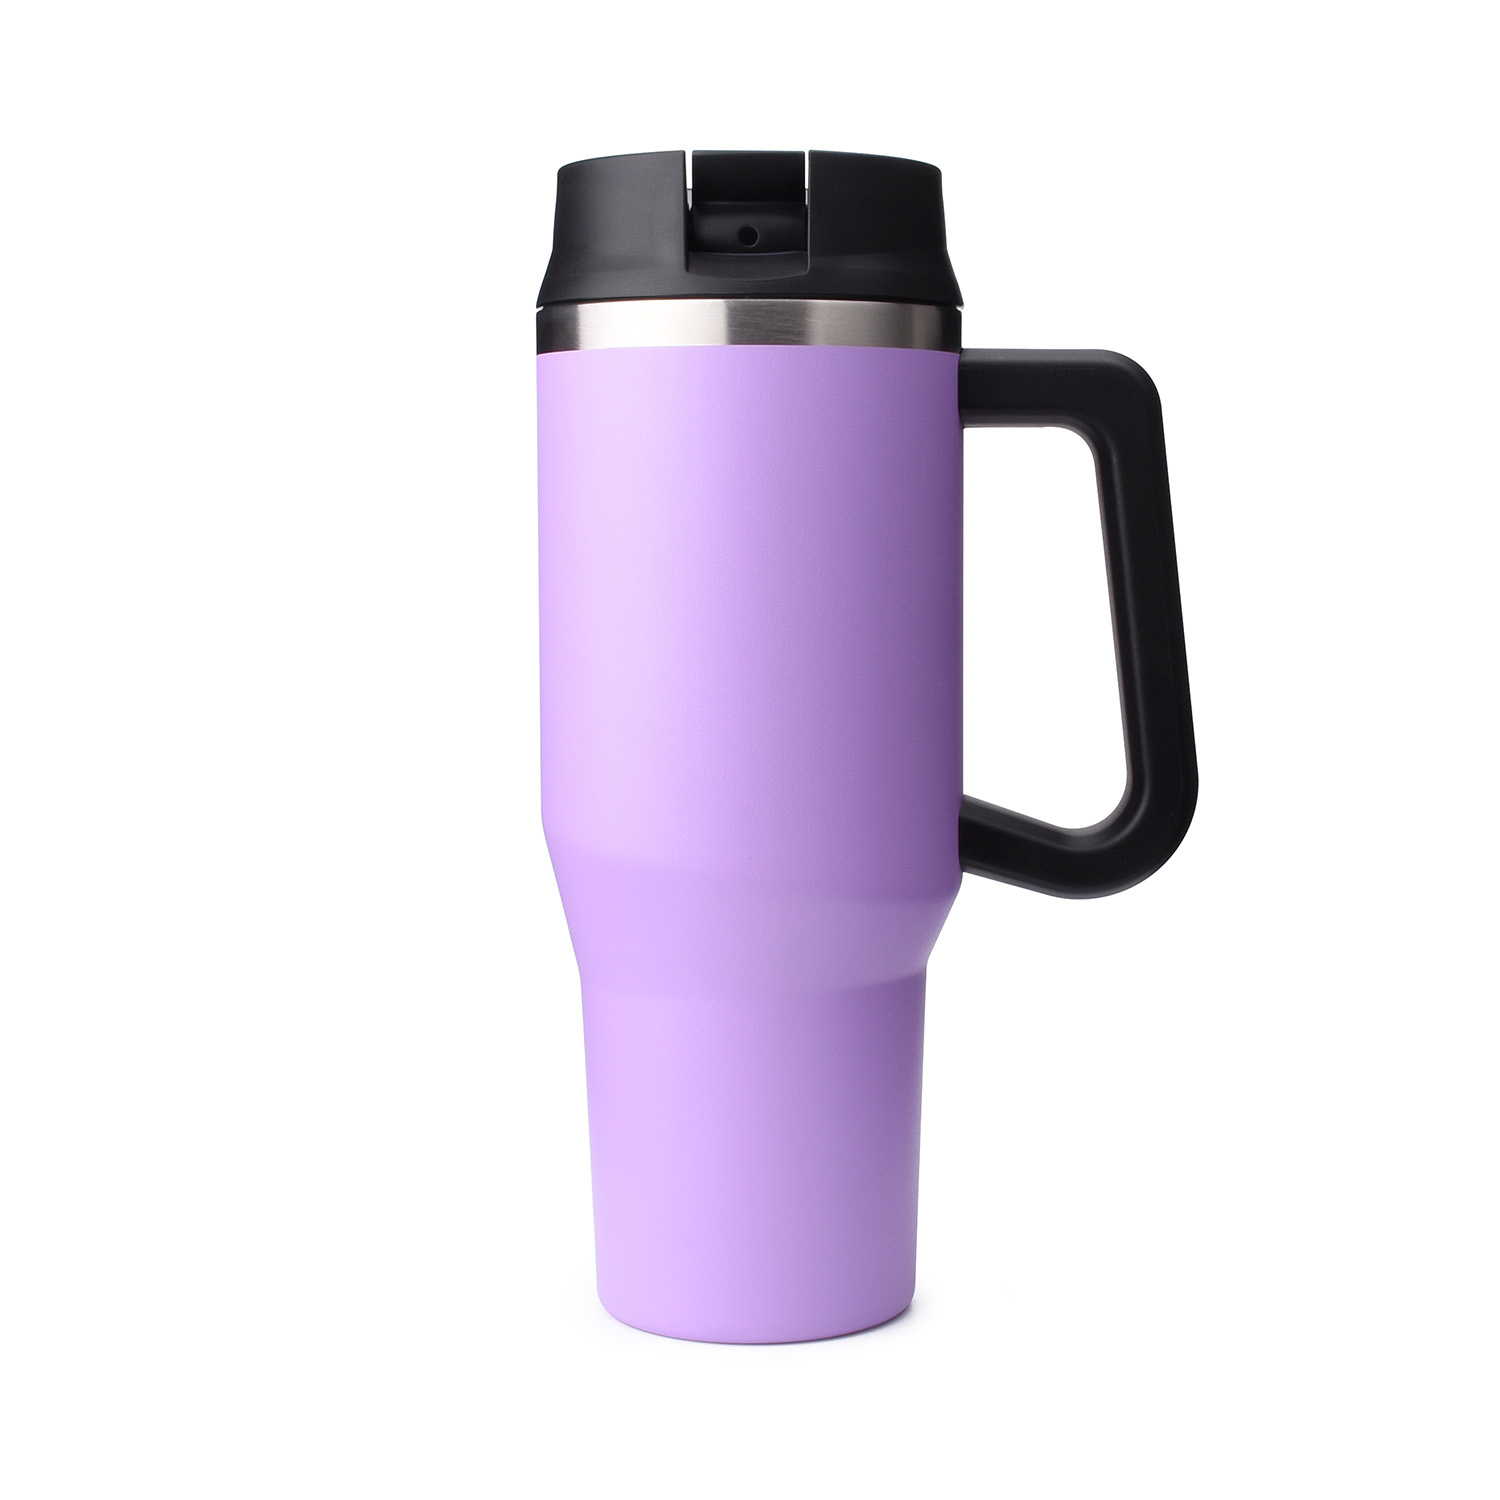 https://www.waterbottle.tech/wp-content/uploads/2021/09/insulated-travel-tumbler-with-handle-32-oz-straw-lid-s213200-1.jpg